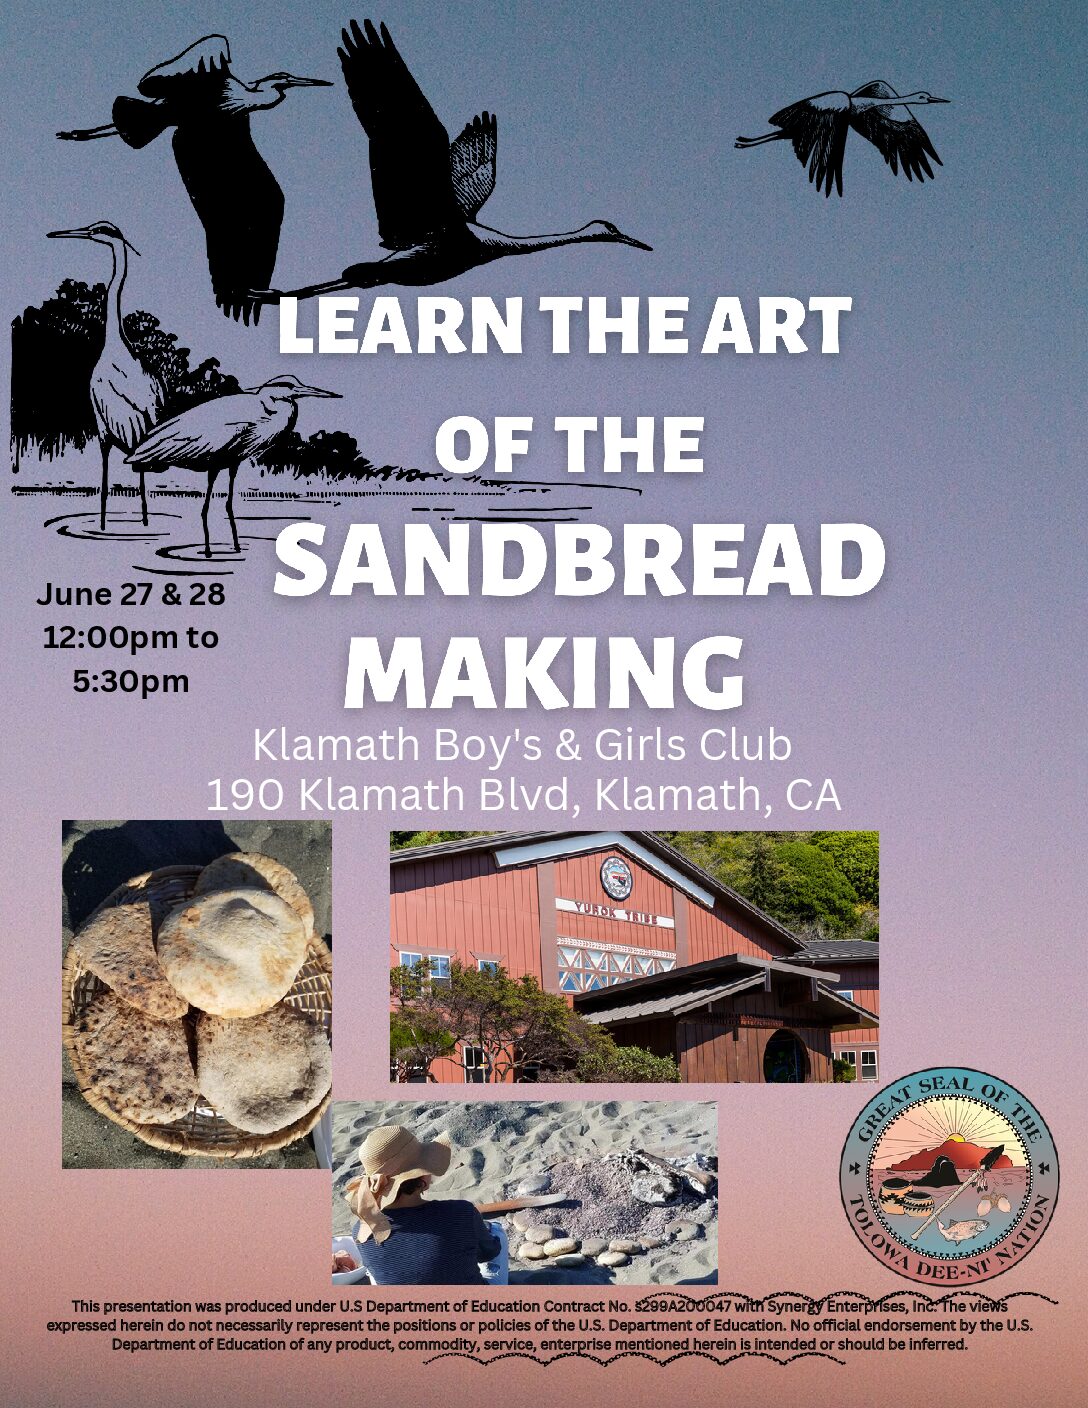 Learn the art of sand bread making